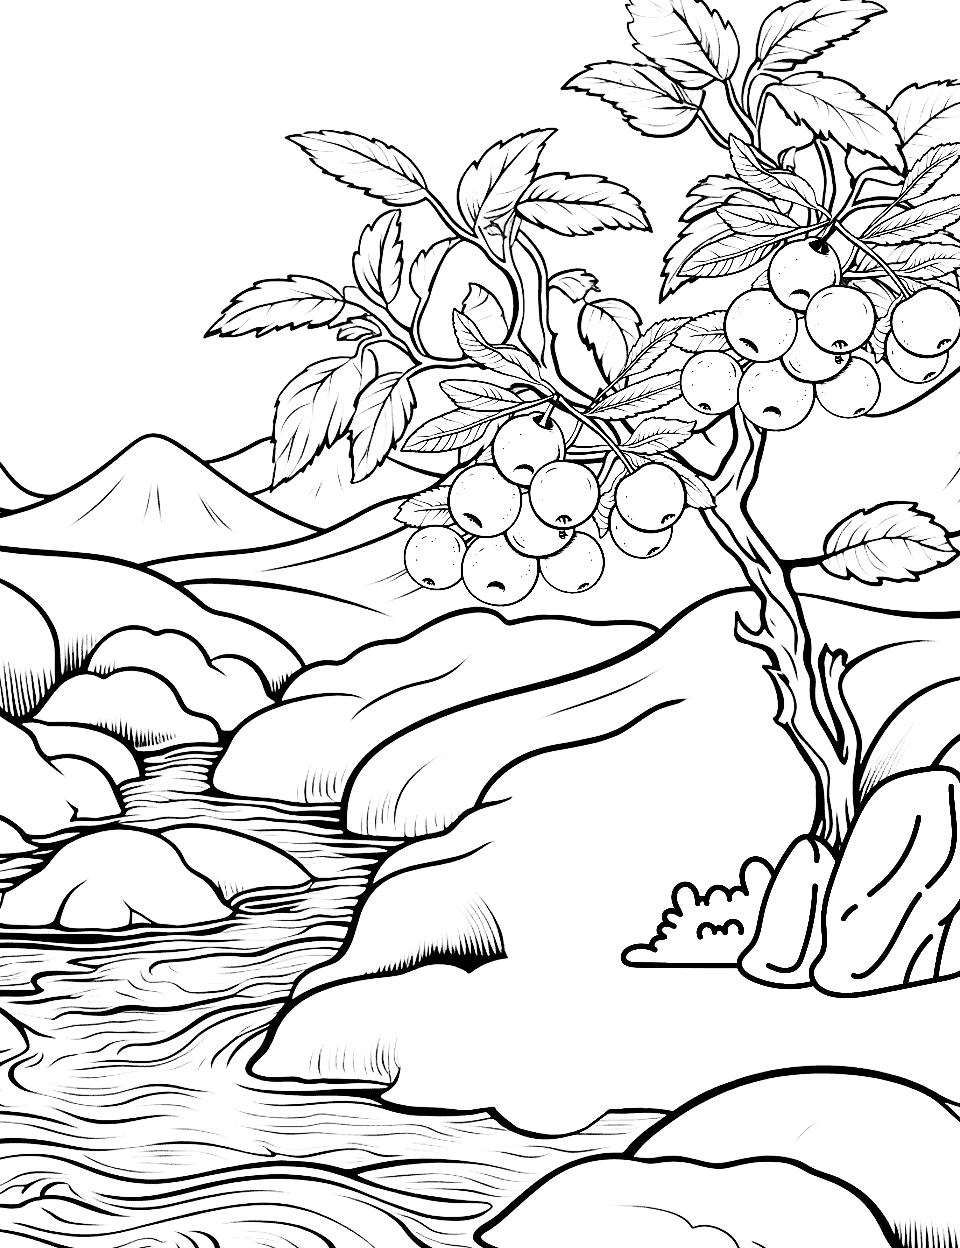 Cranberry Creek Fruit Coloring Page - Cranberries near a small creek.